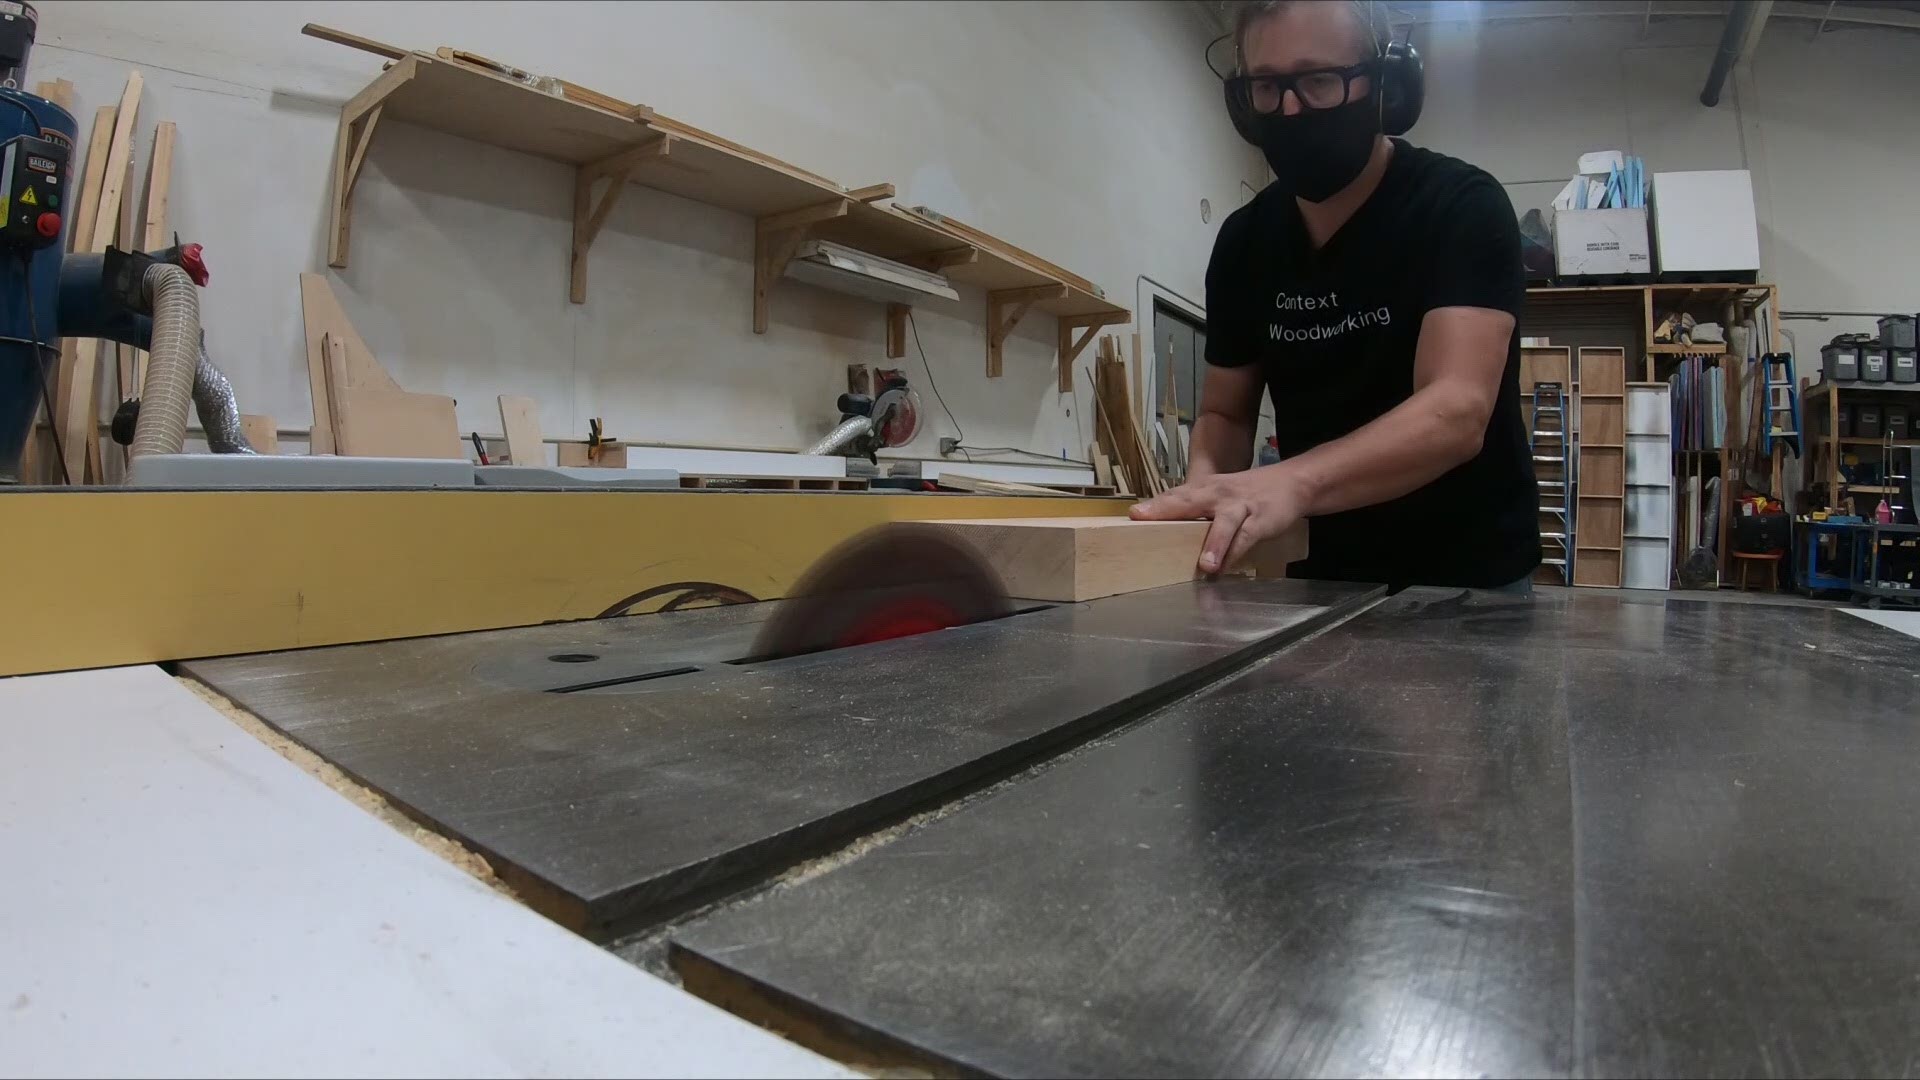 Woodworkers are transitioning from creative furniture projects to building rudimentary pop-up decks for restaurants trying to stay afloat during the pandemic.